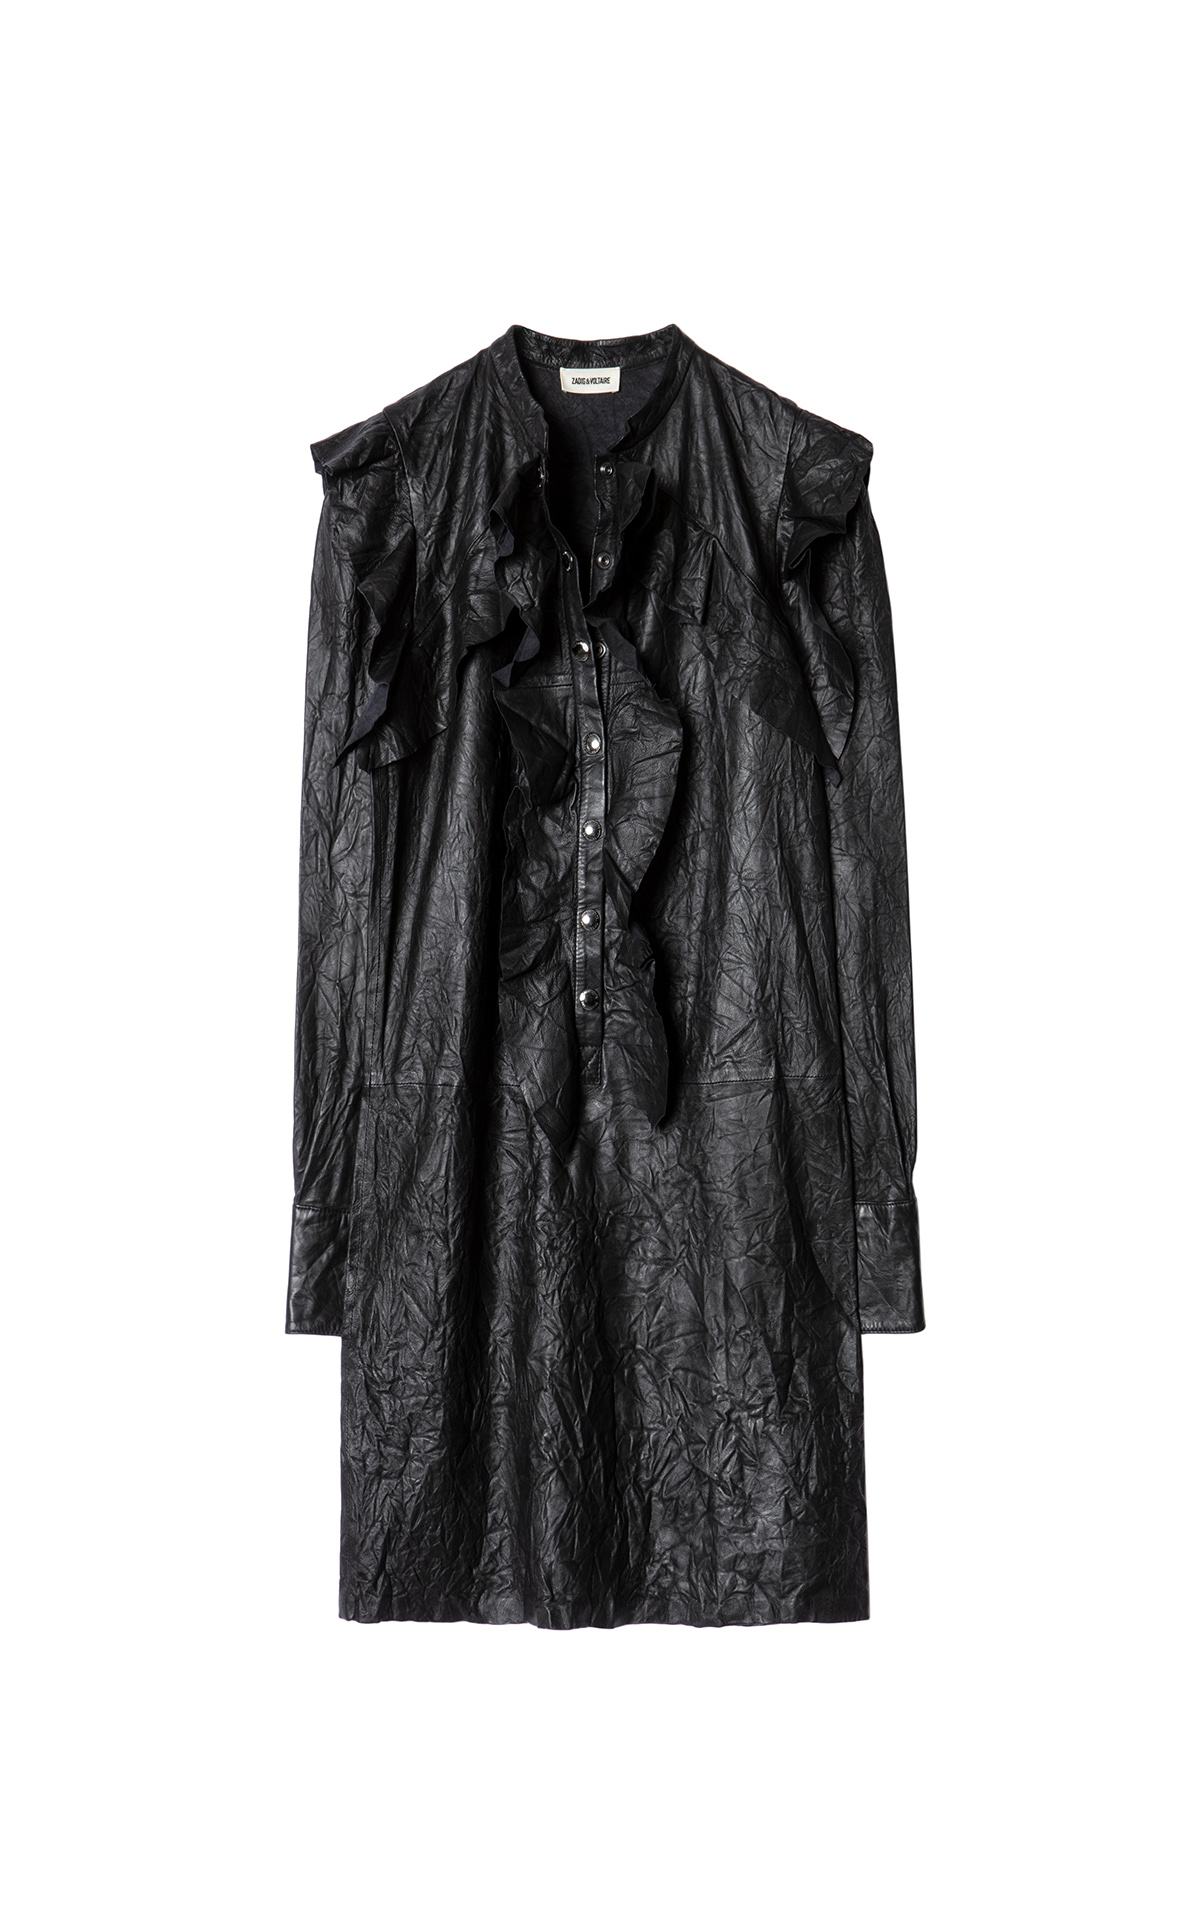 Black leather printed dress Zadig&Voltaire